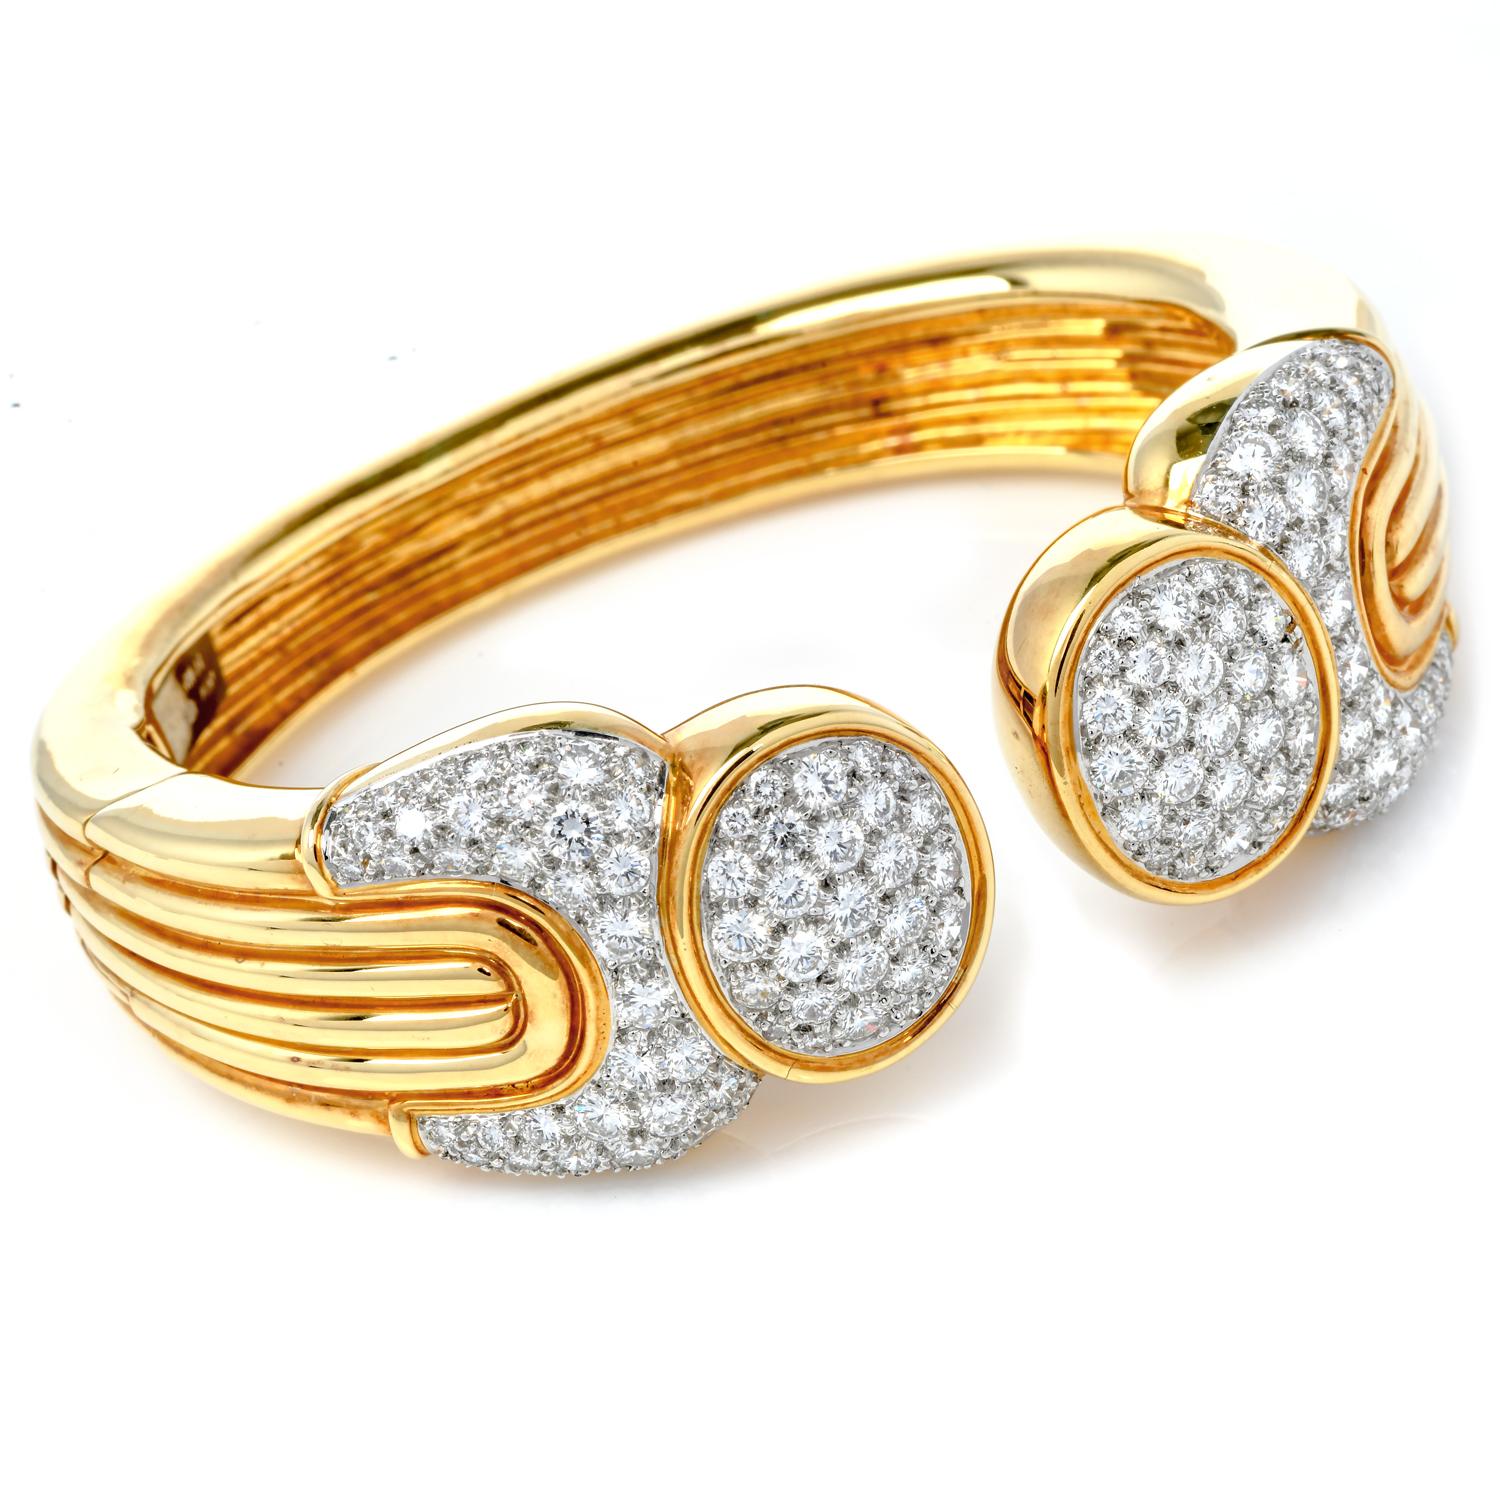 This opulent Bypass Vintage 1980s bracelet is crafted in solid 18K Yellow Gold & Platinum, weighing 77.2 grams, and measures 6.25